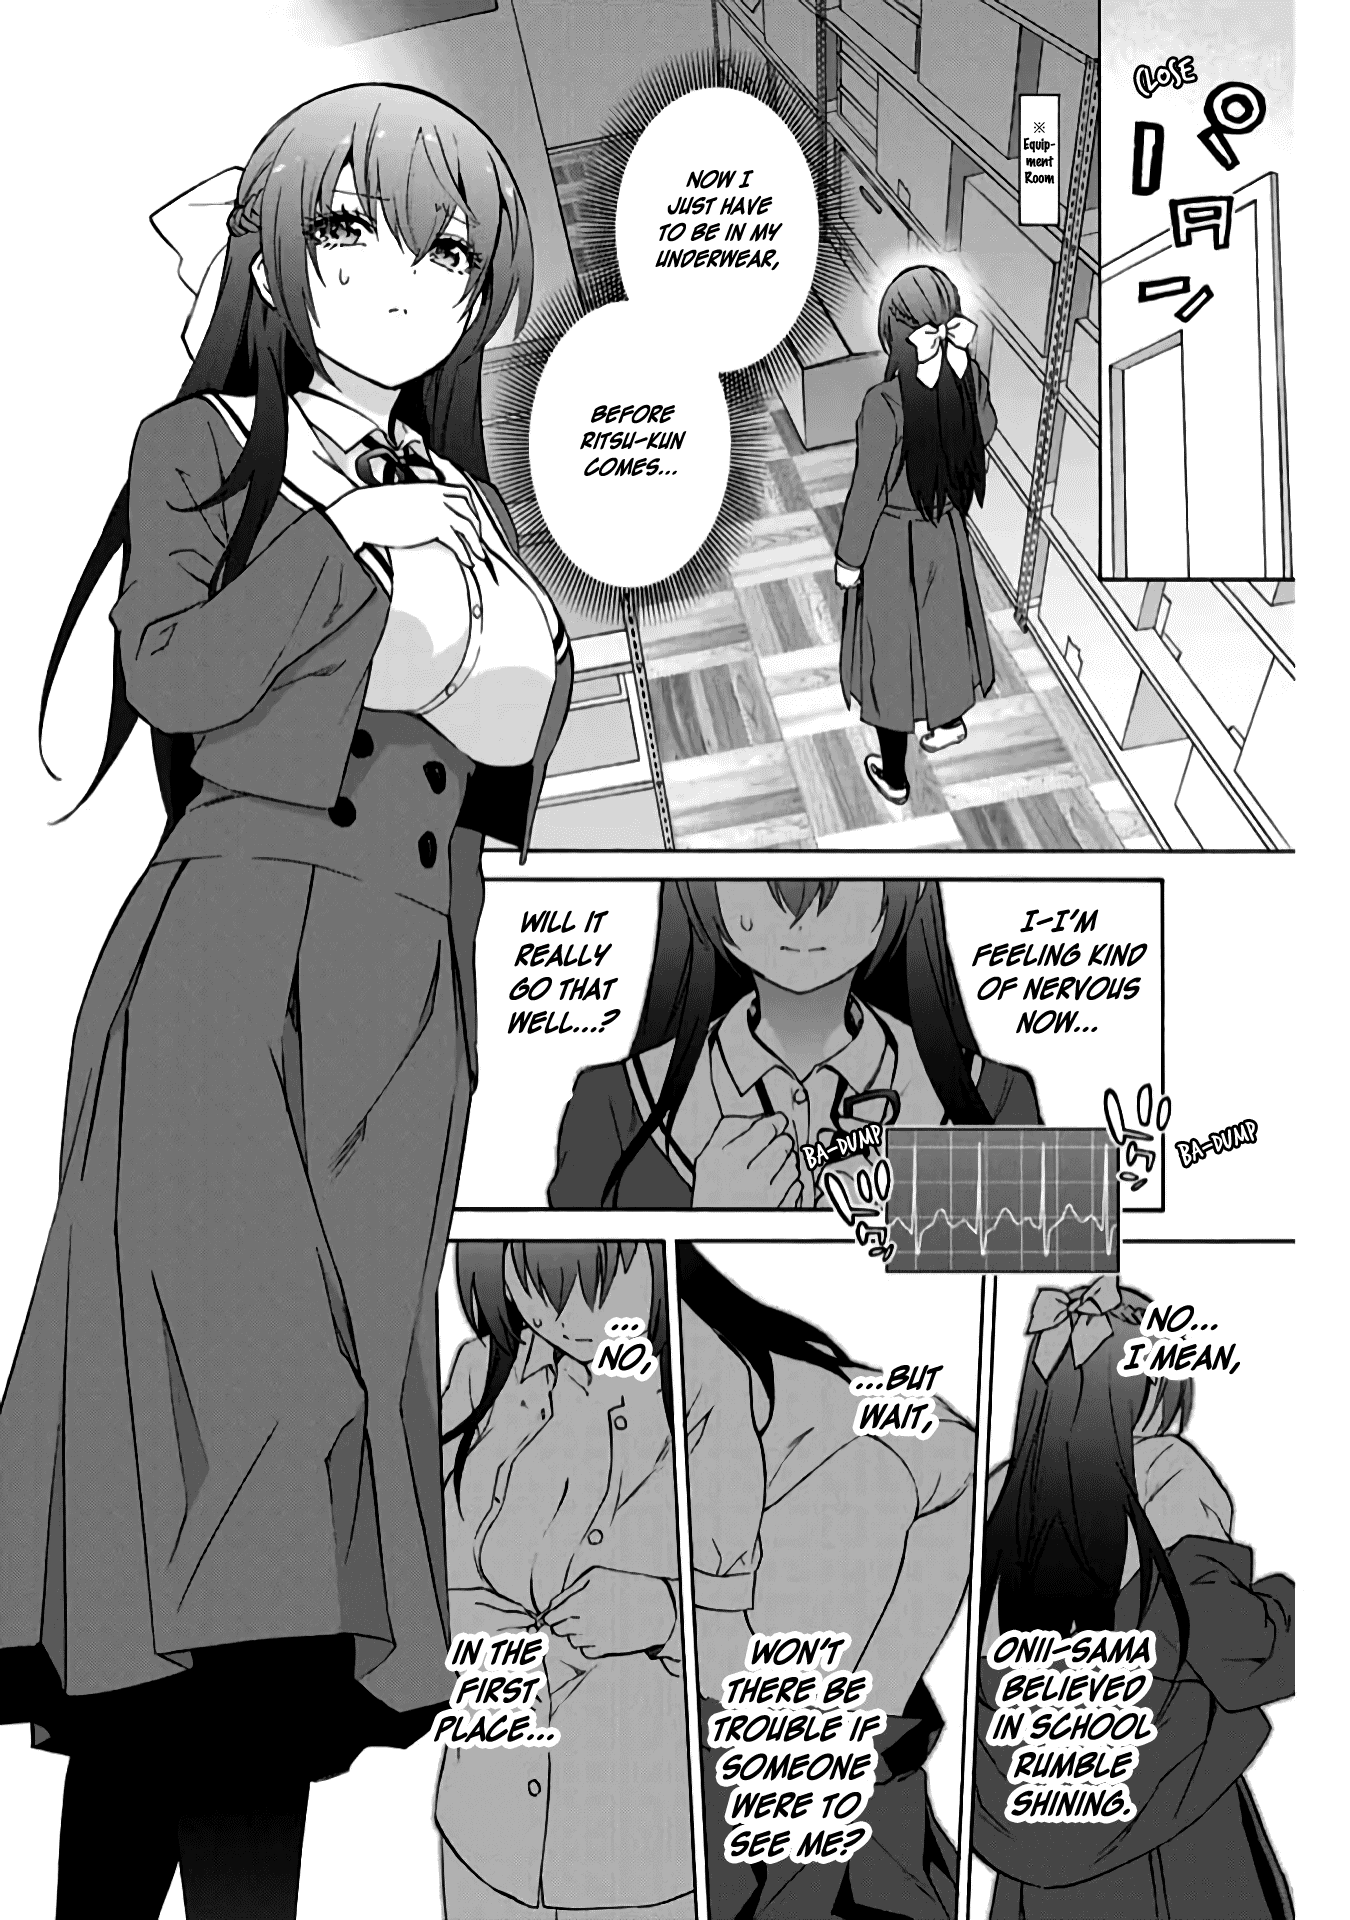 My Senpai Is After My Life - chapter 6.5 - #4